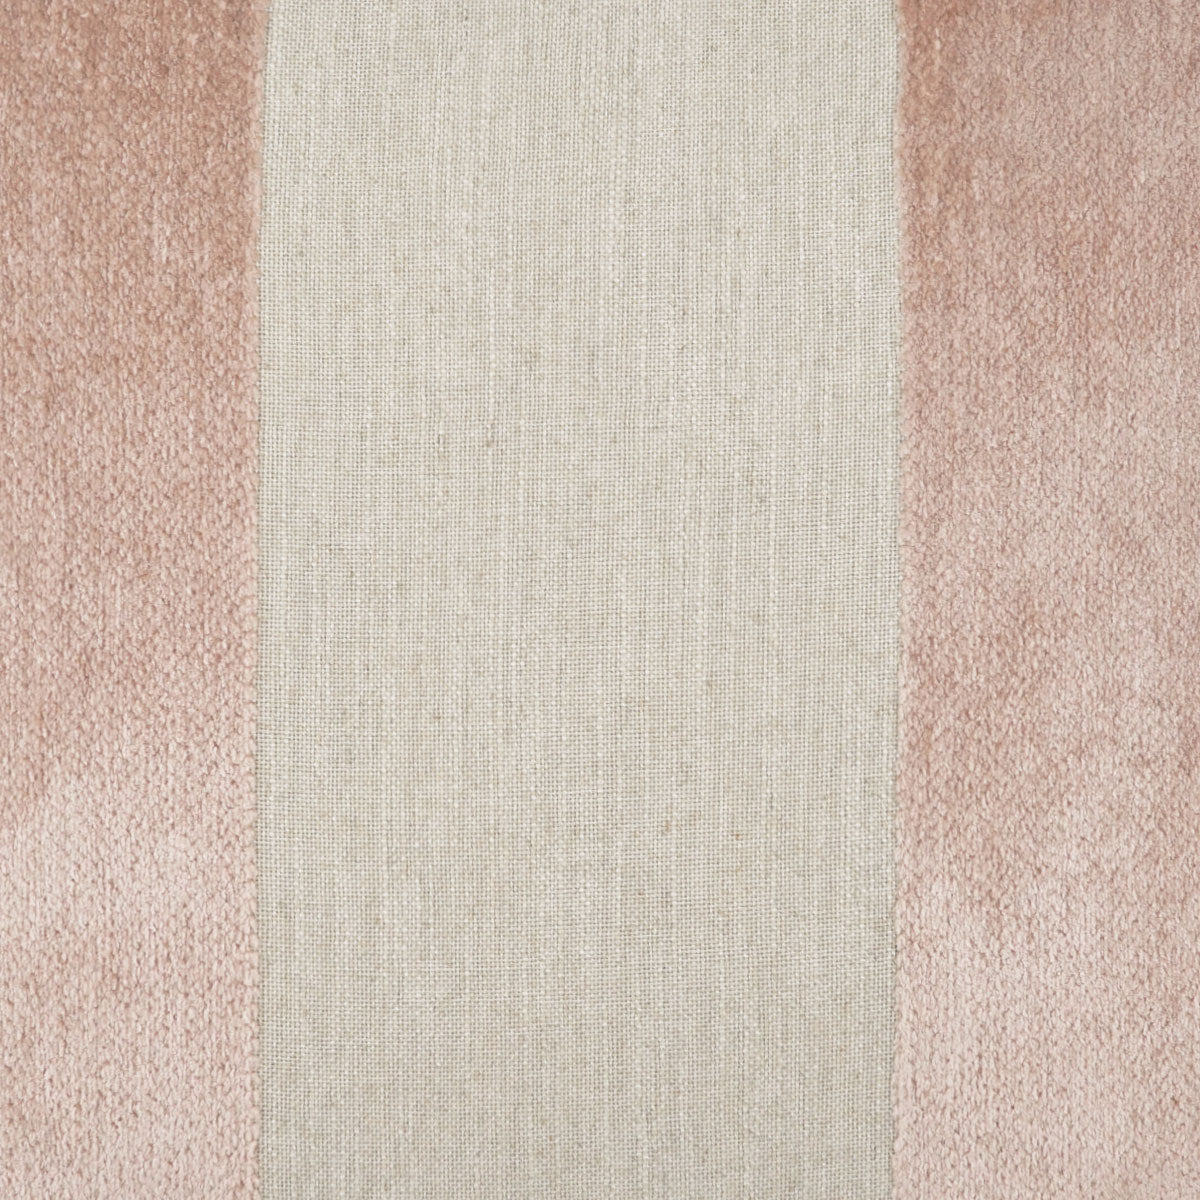 Over the Line Swatch / Blush